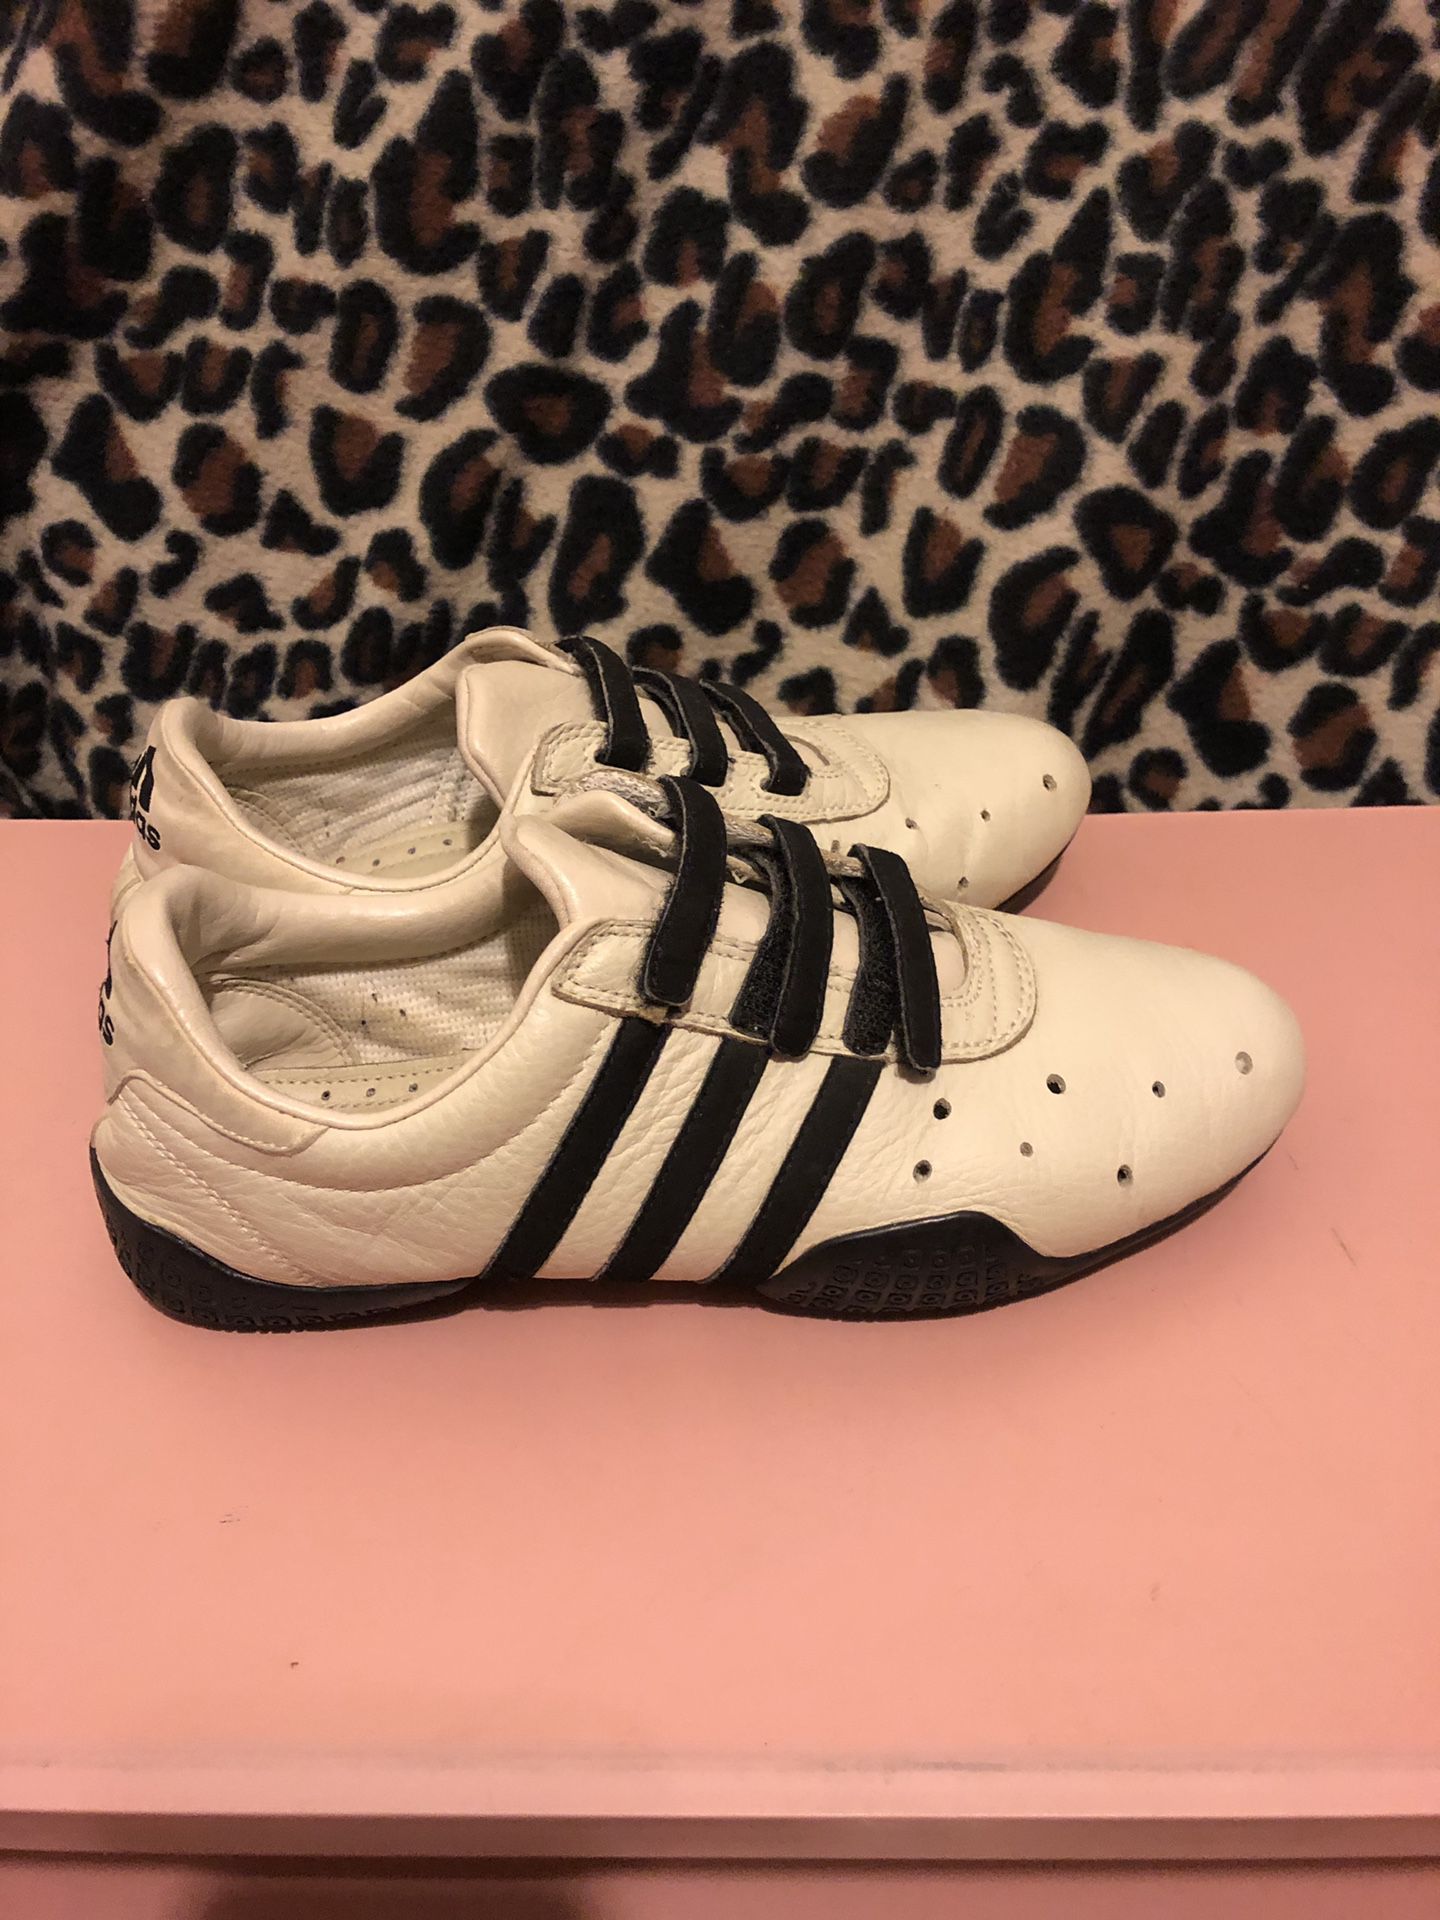 Adidas size 7.5 shoes Women’s